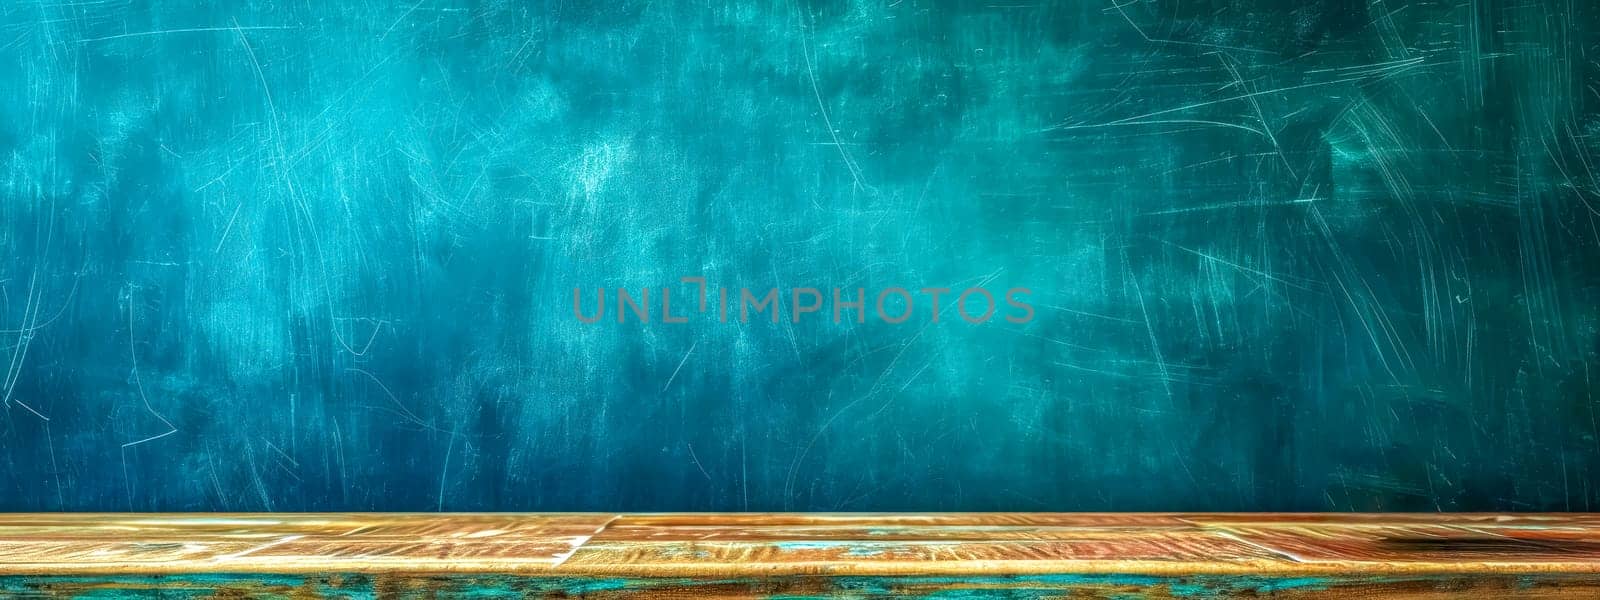 wide, textured teal chalkboard with scratches and marks of use, with a worn wooden ledge at the bottom, suitable for educational or coaching themes by Edophoto